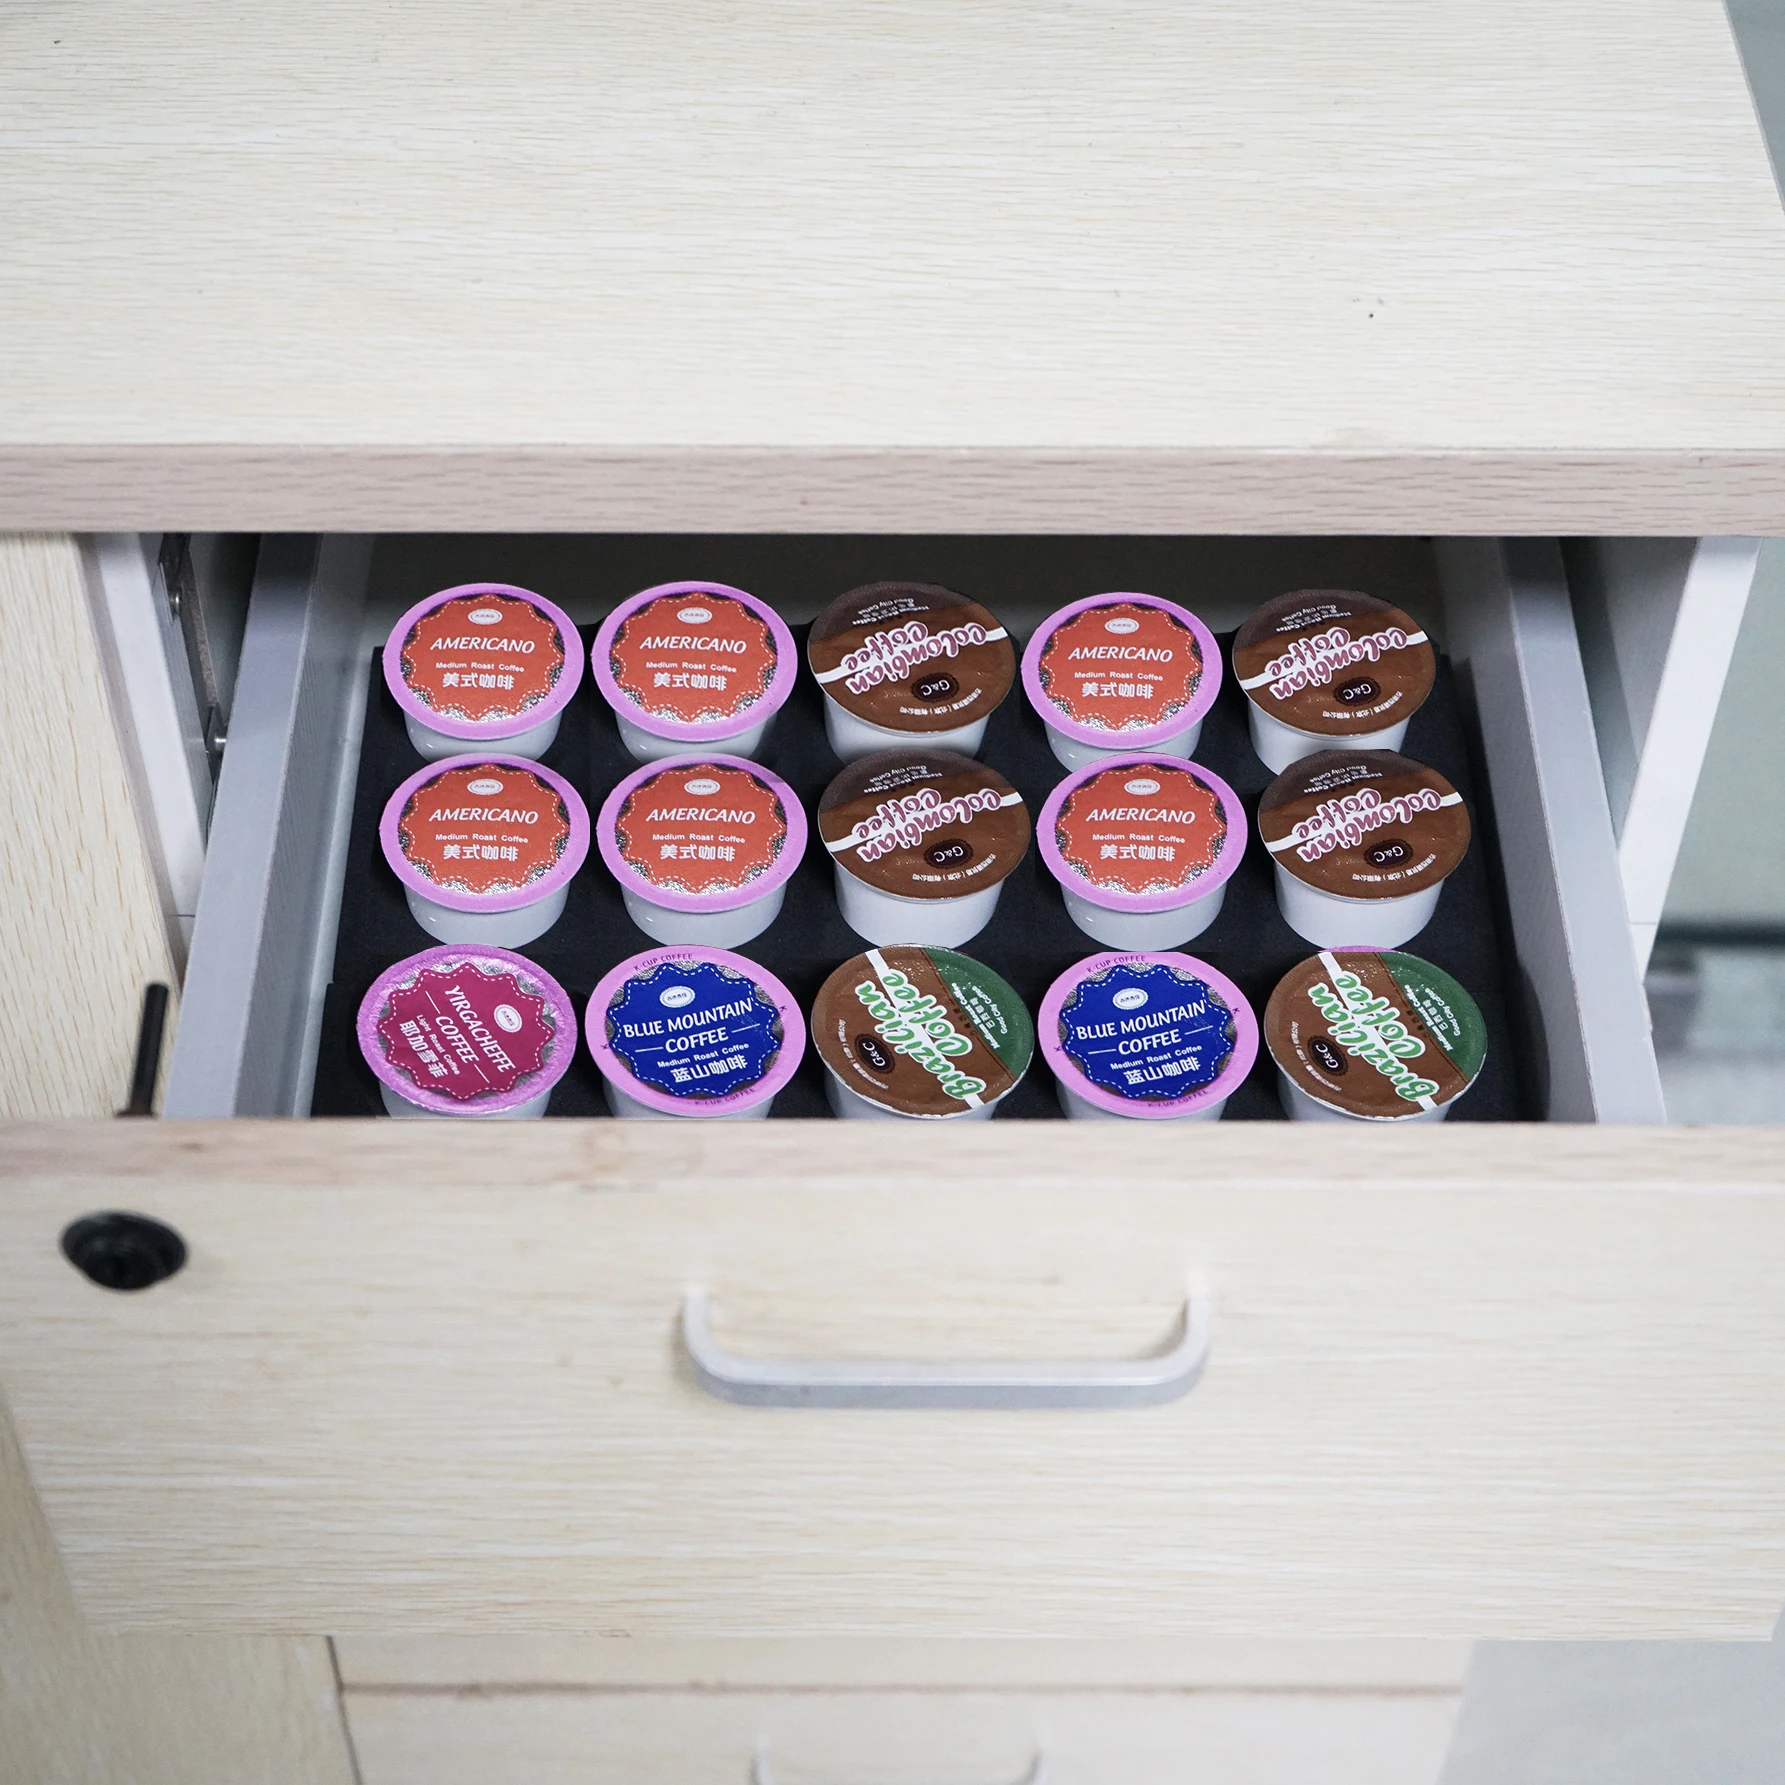 https://ae01.alicdn.com/kf/Sbbc379ebba694e2da2586e095f6b3ca7M/K-Cup-Holder-Compatible-With-Keurig-Coffee-Pods-K-Cup-Drawer-Organizer-Holders-For-Counter-K.jpg